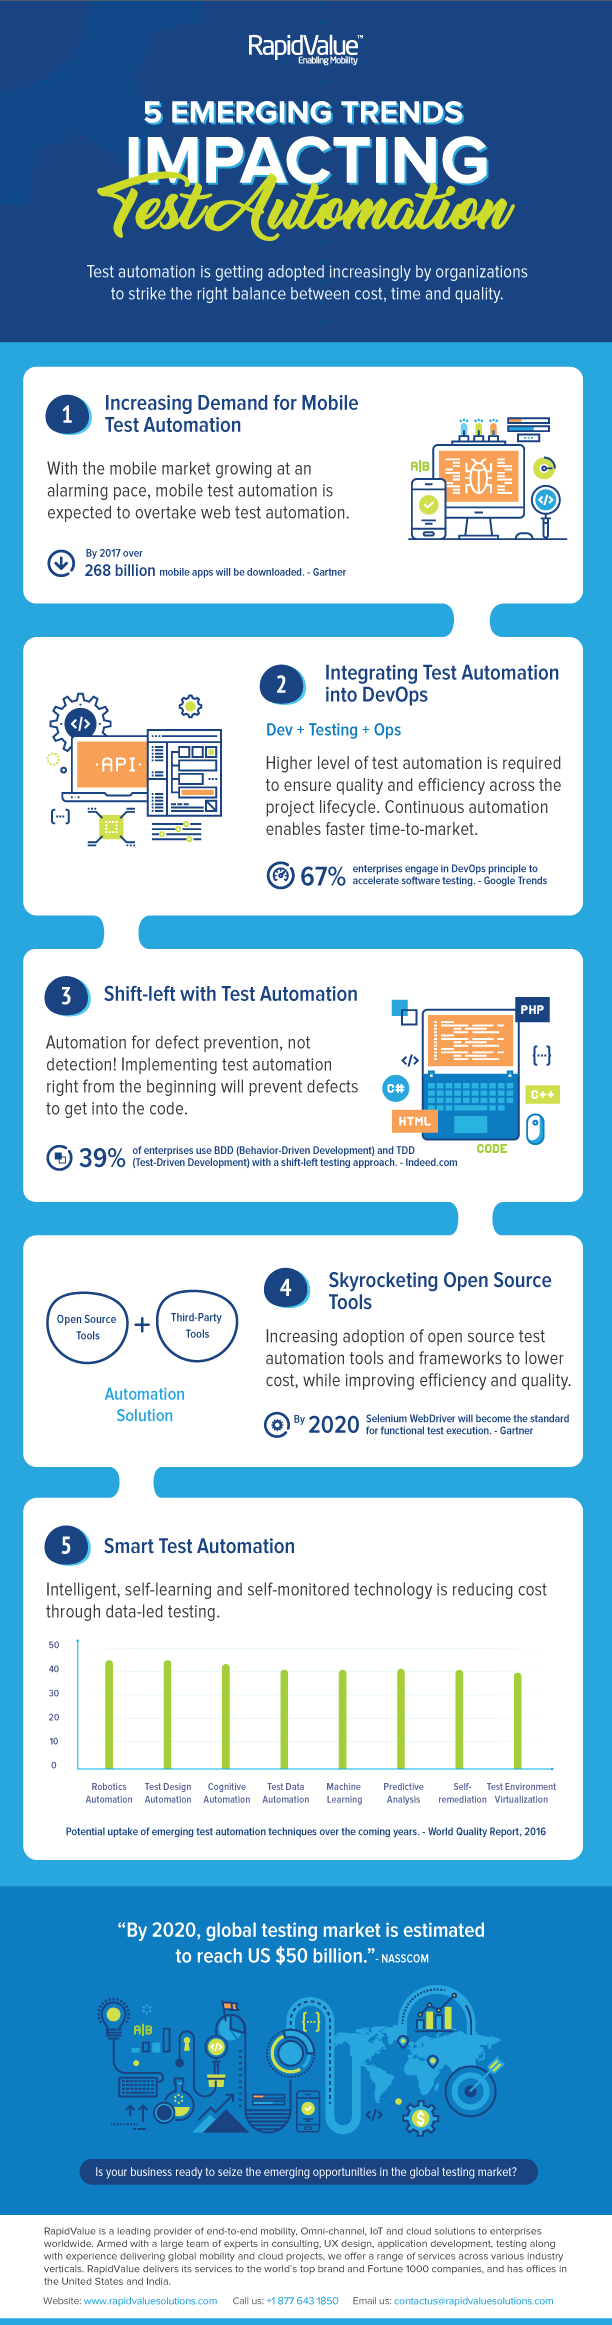 5 emerging trends impacting test automation